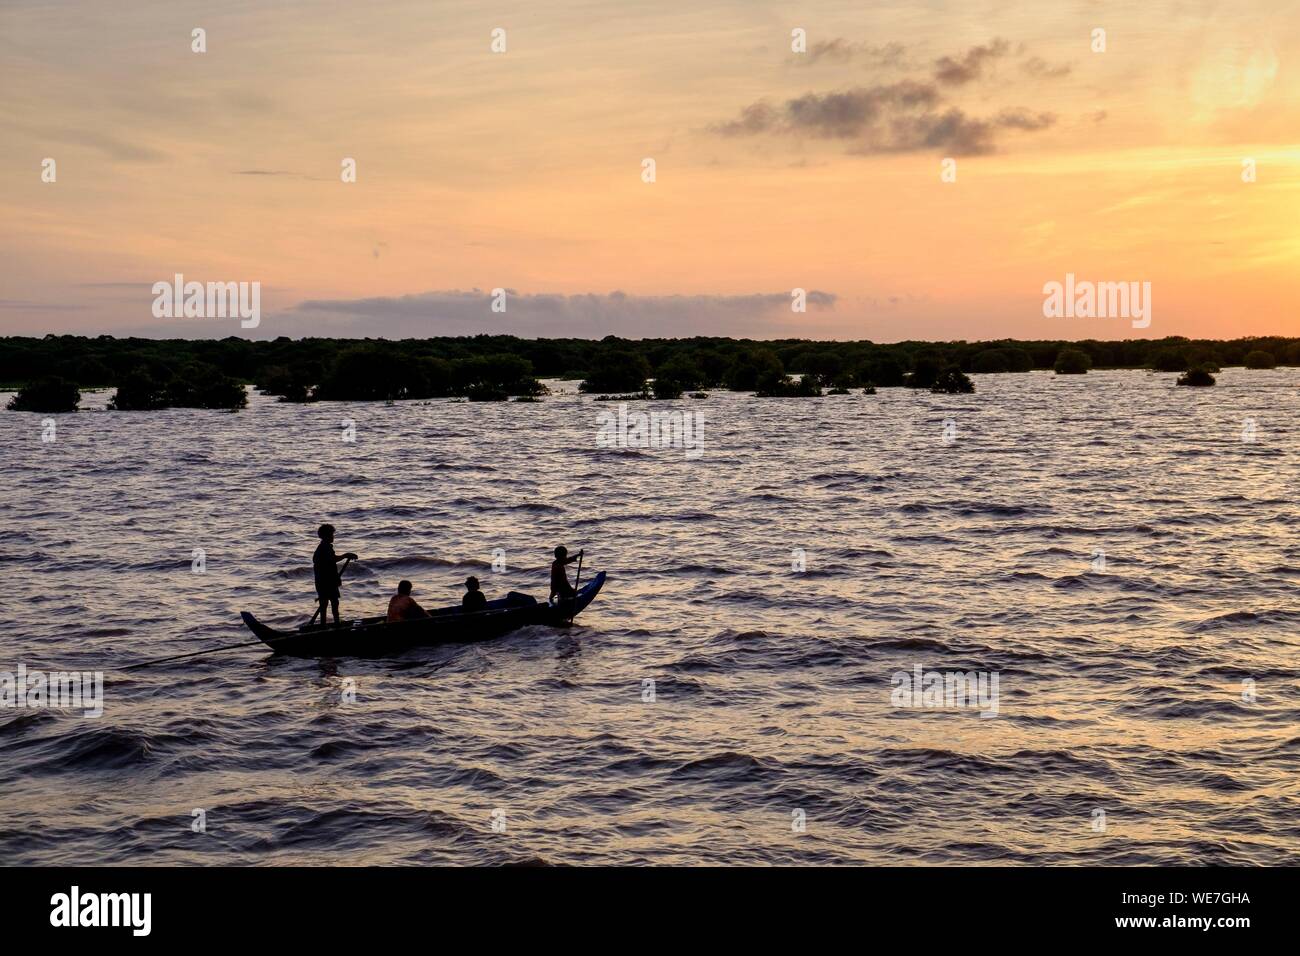 Cambodia, Kompong Phluc or Kampong Phluc, near Siem Reap, fishermen near the flooded forest on the banks of Tonlé Sap lake Stock Photo